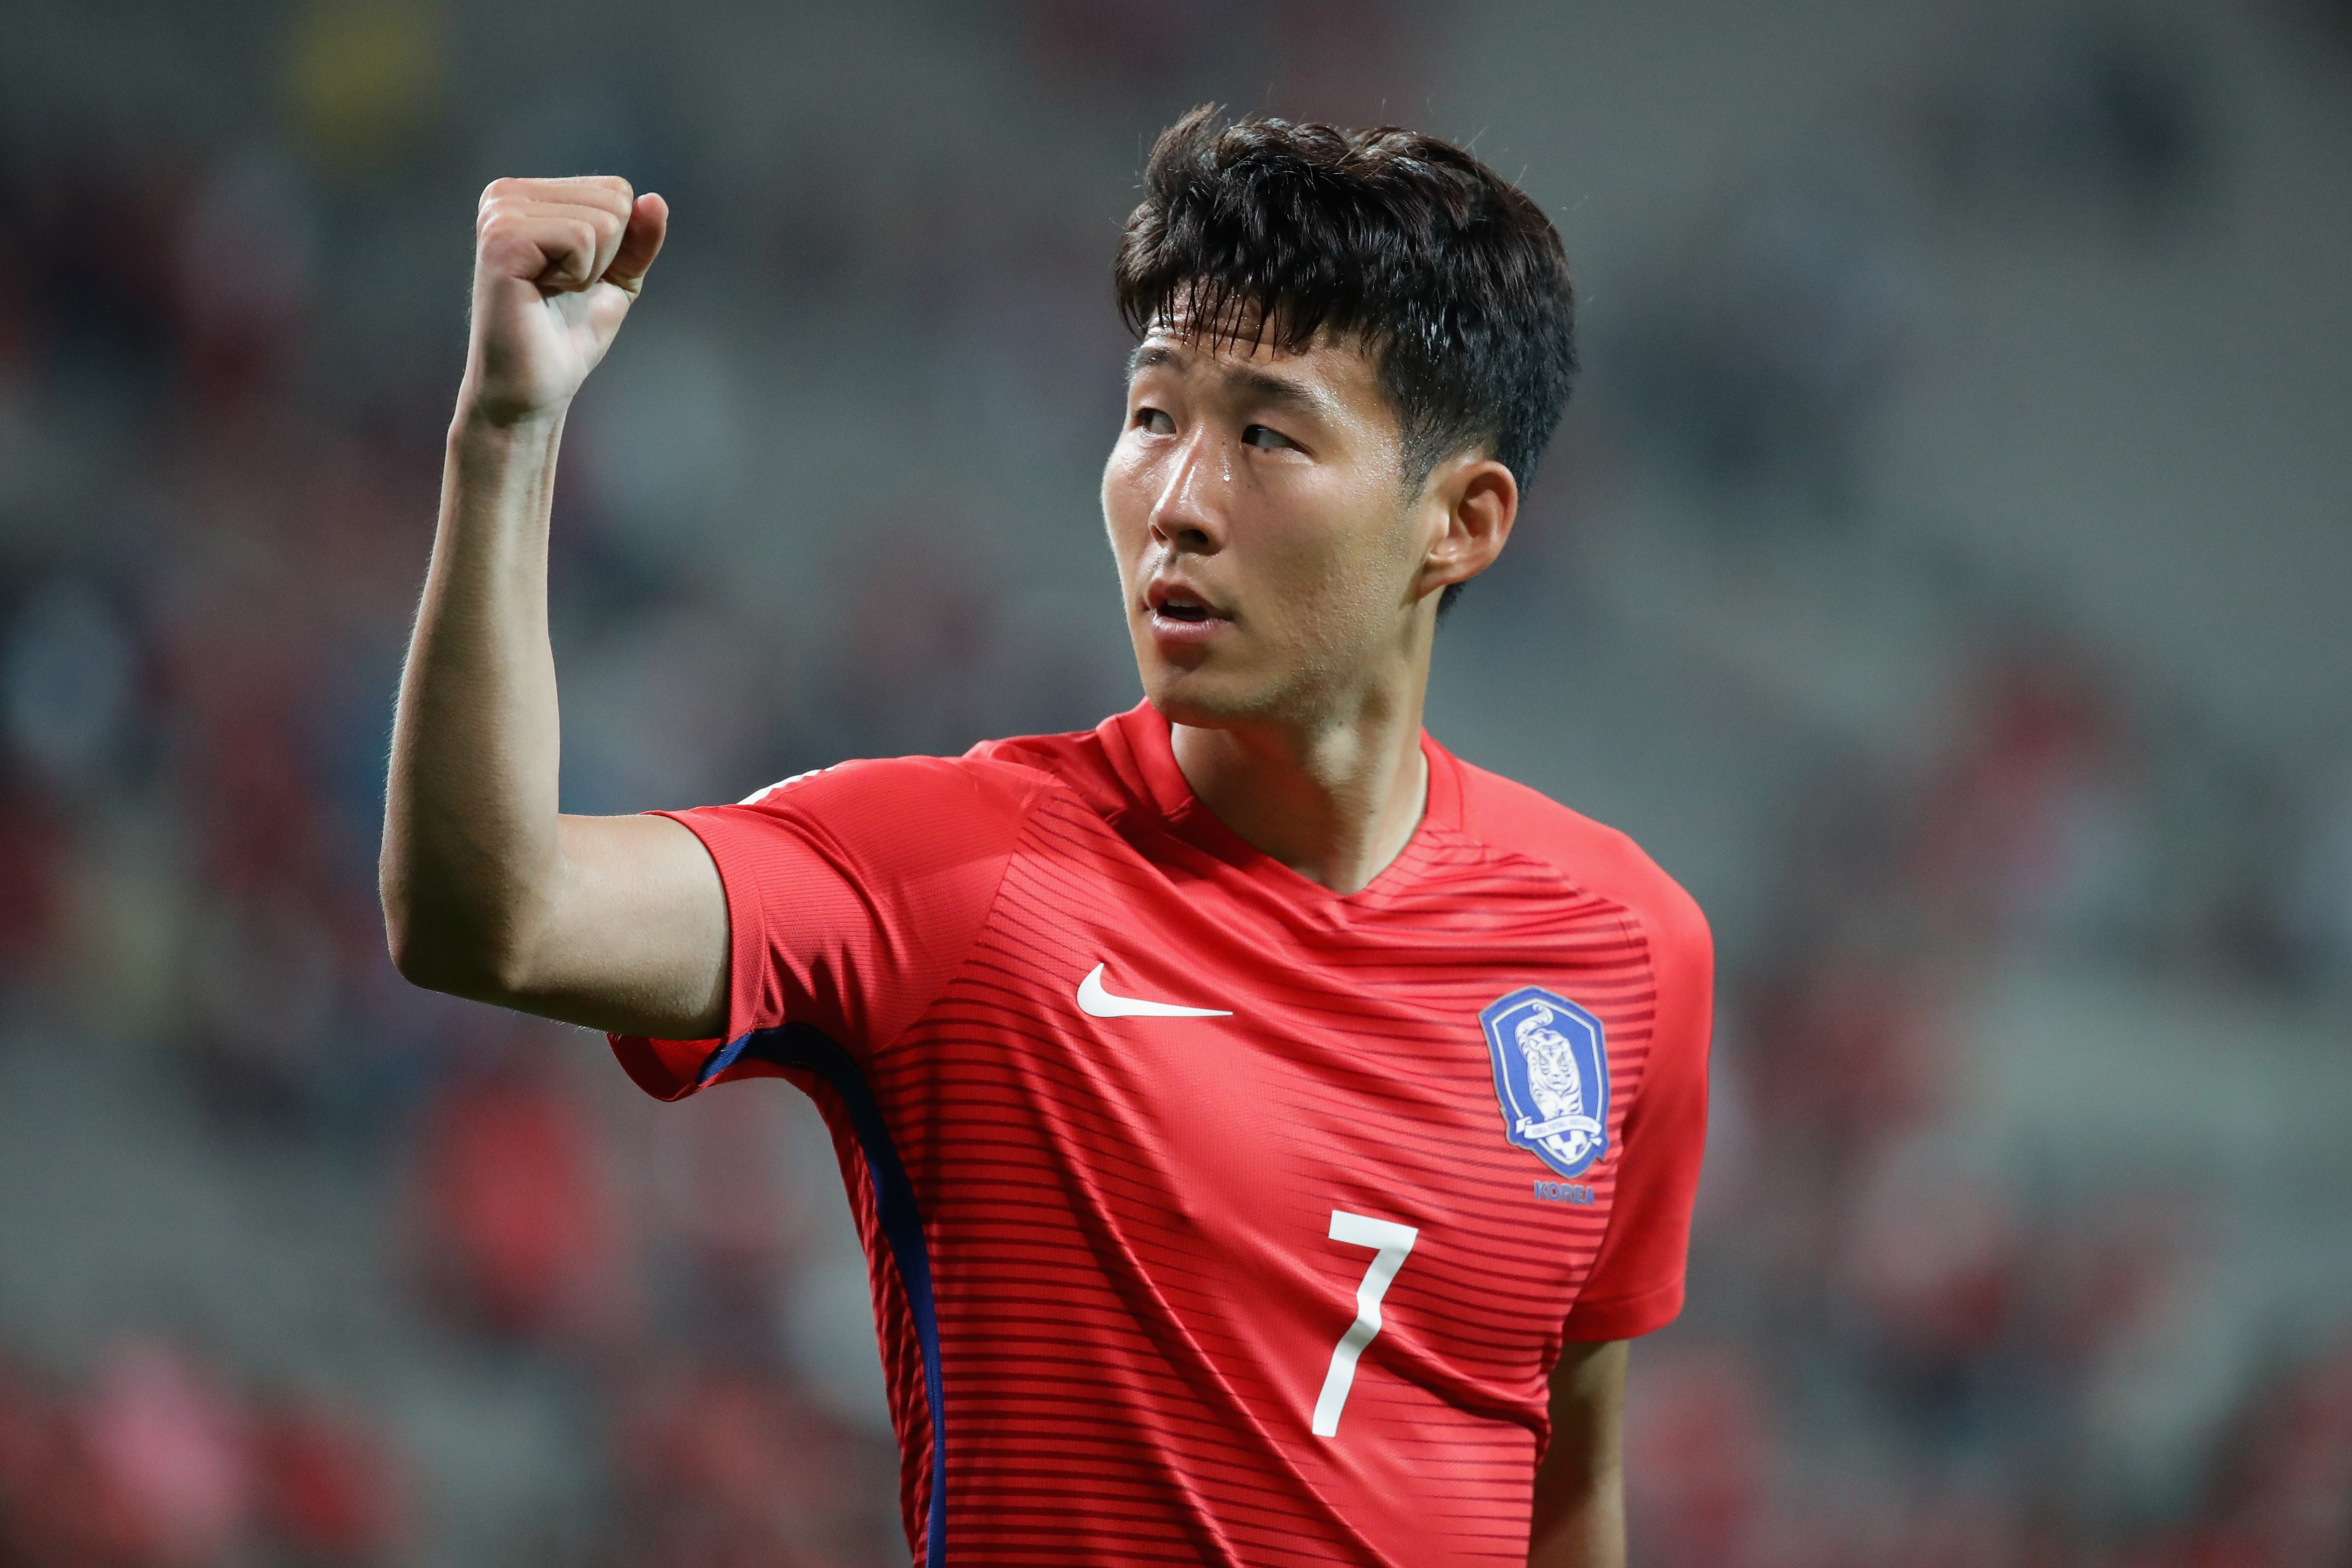 No Harry Kane repeat! Spurs to trigger captain Son Heung-min's contract  option, tying him to club until 2026